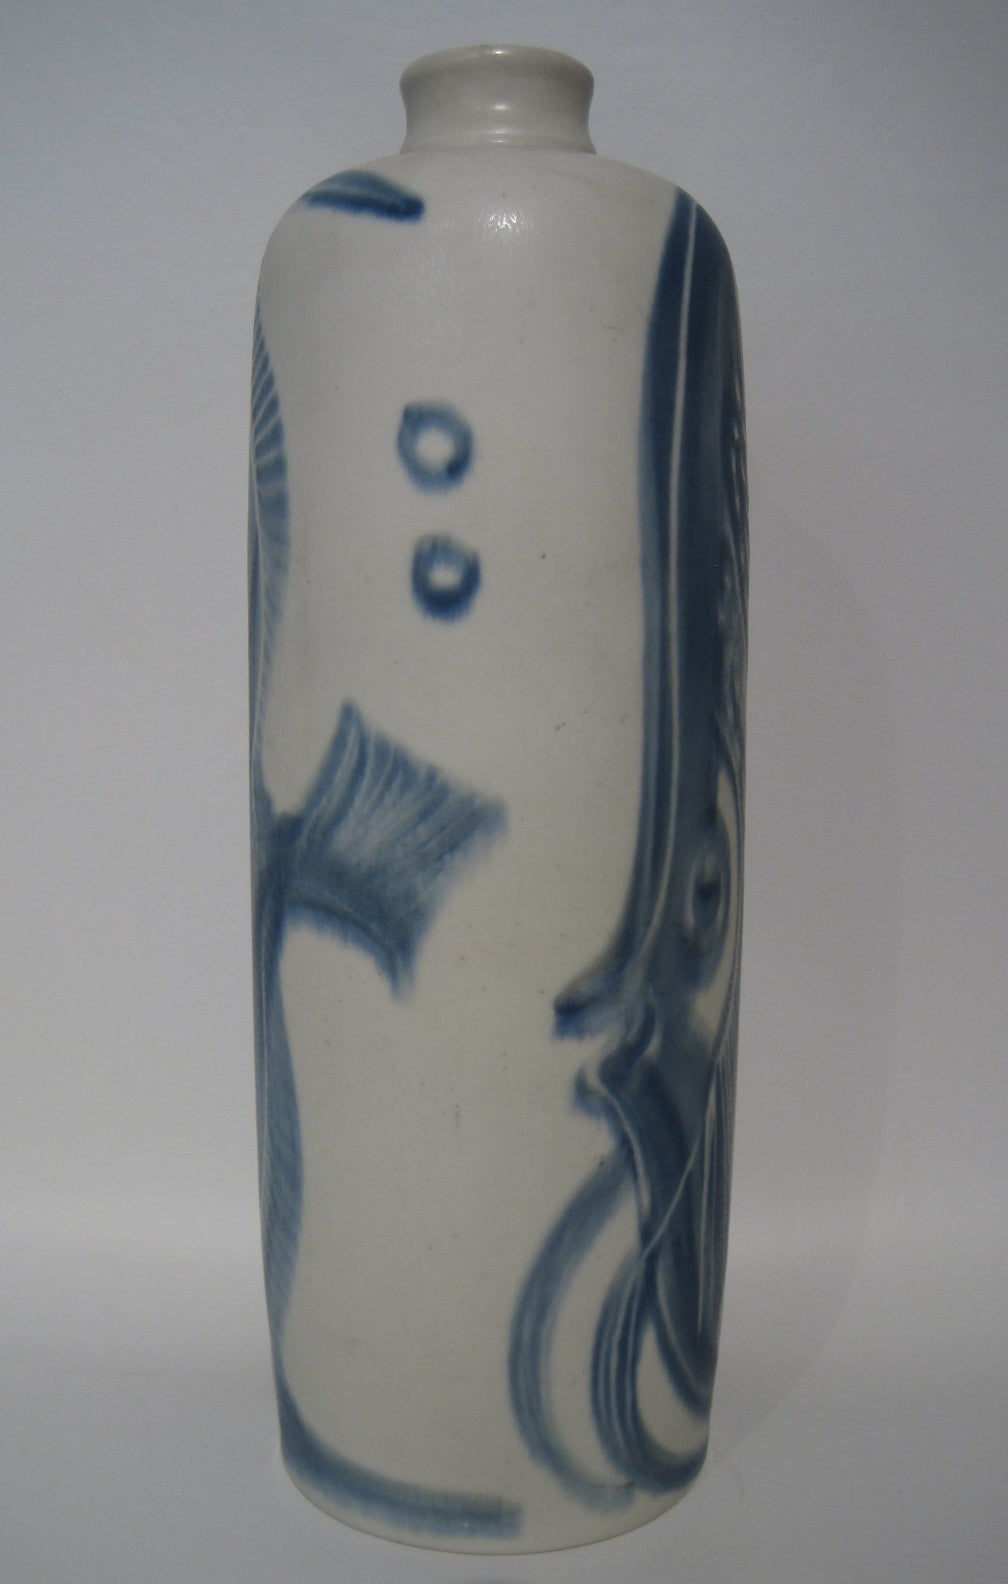 Rare Carl Harry Stalhane glazed stoneware vase for Rörstrand.

Free shipping within the United States and Canada.